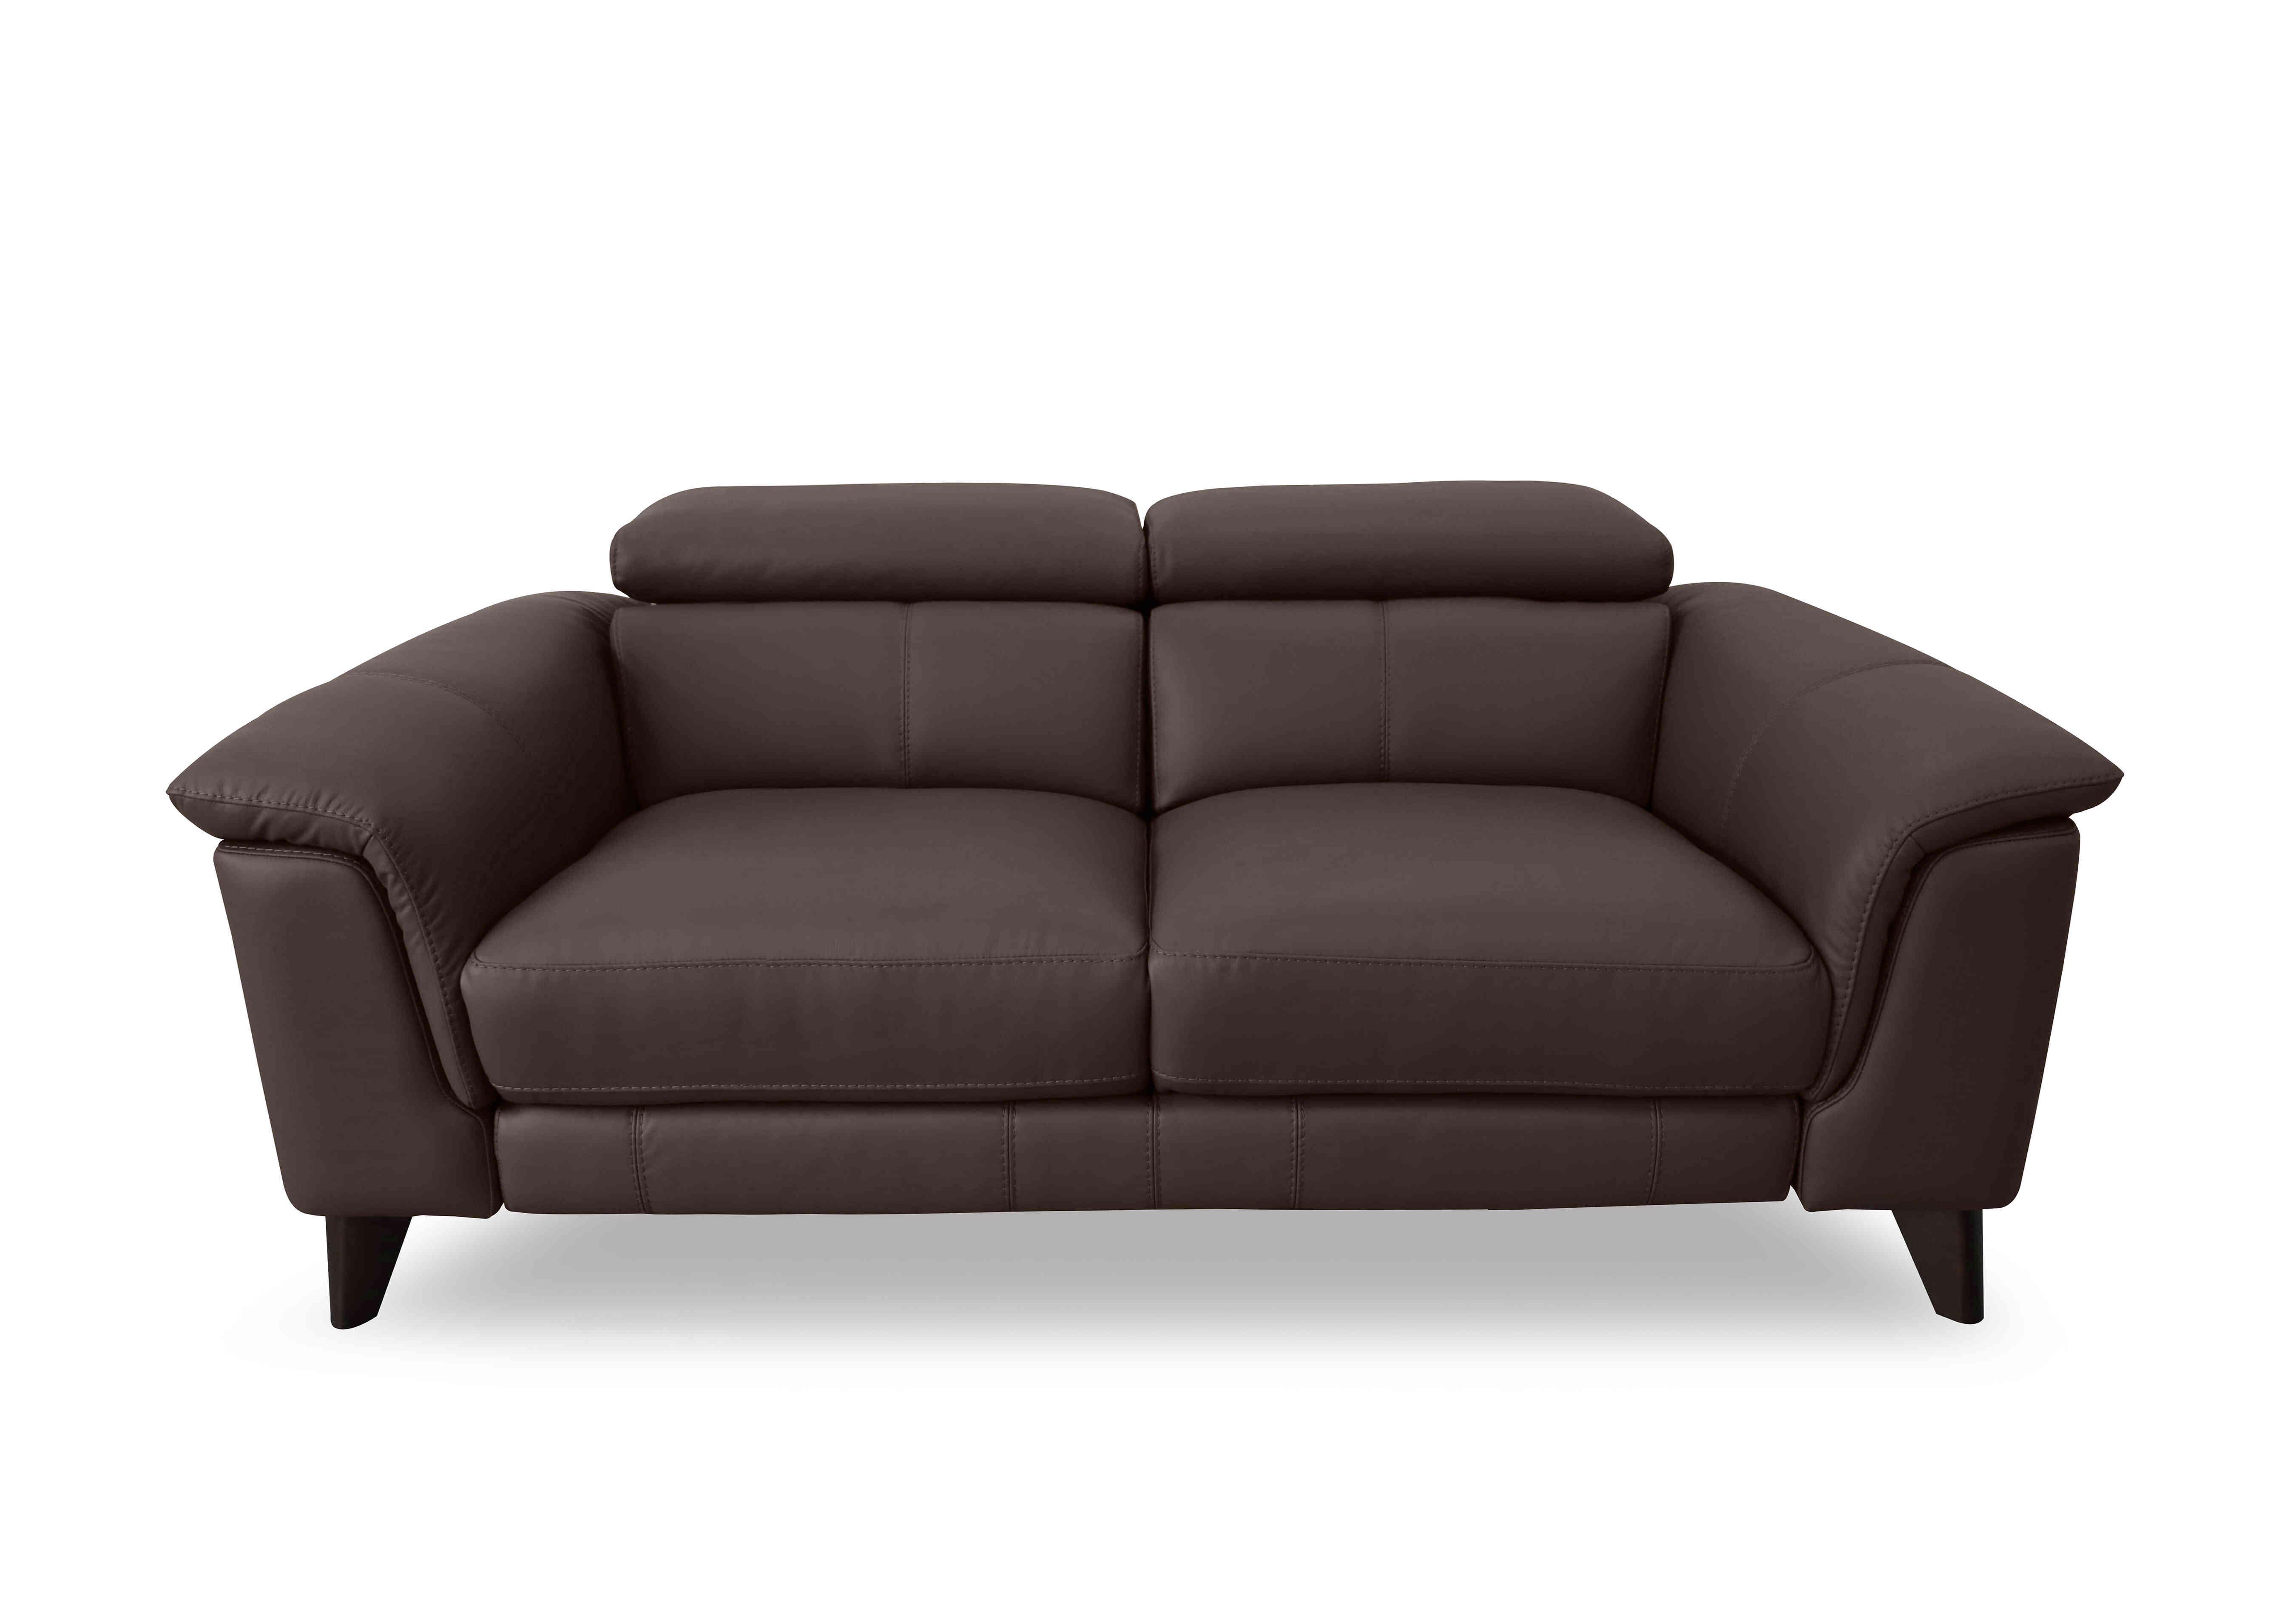 Wade 3 Seater Leather Sofa in Nw-512e Cacao on Furniture Village